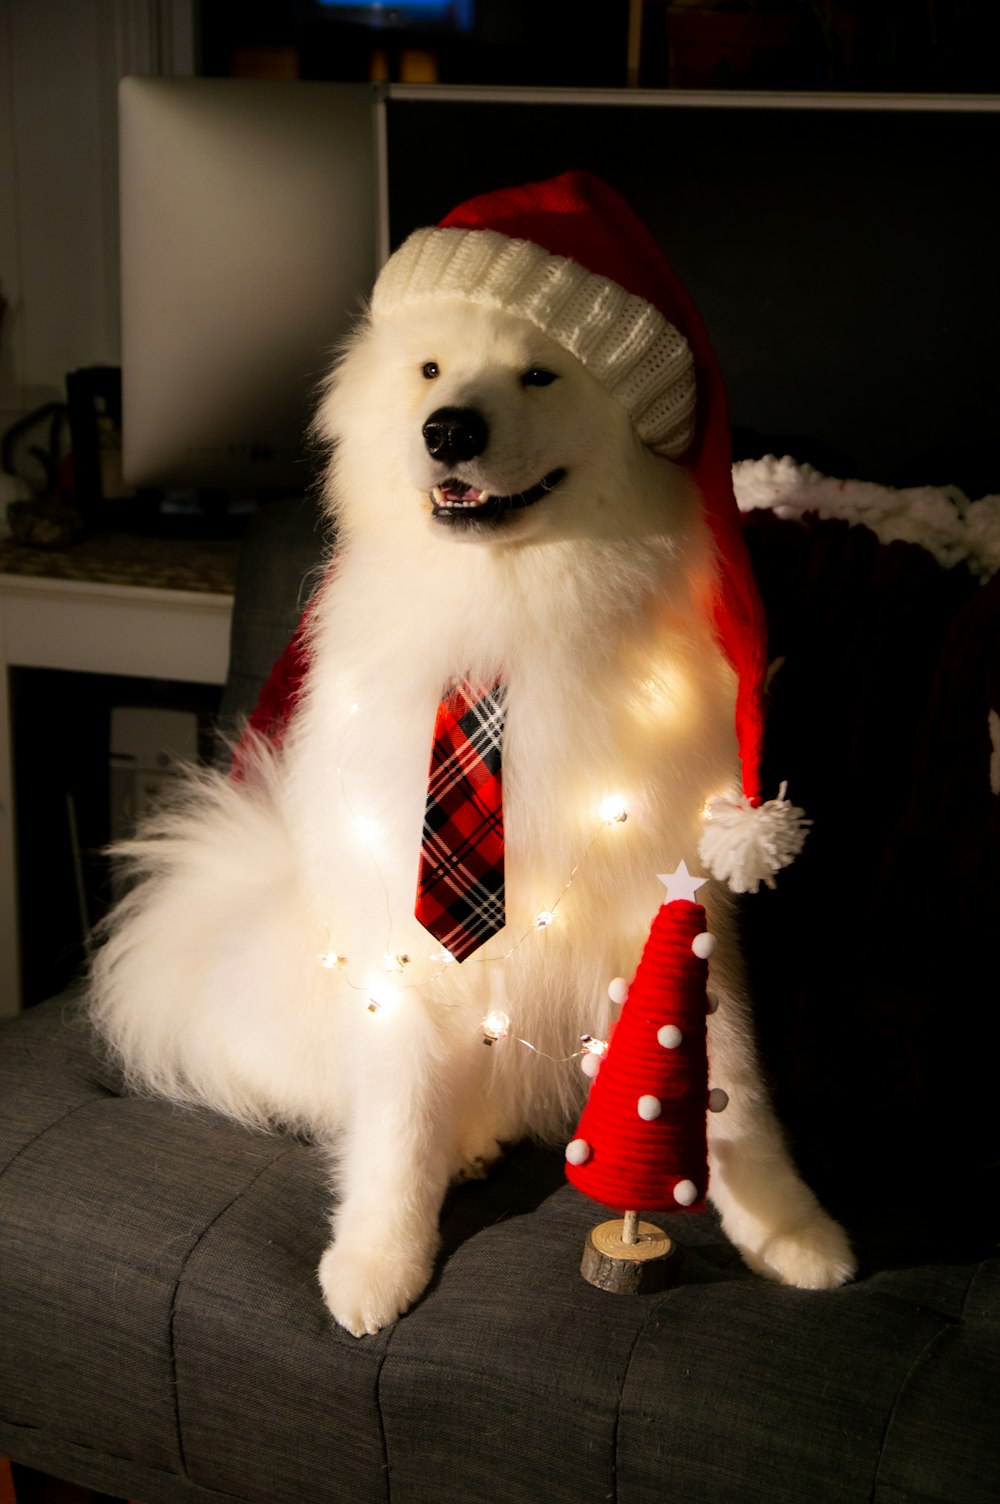 a white dog wearing a red and white tie